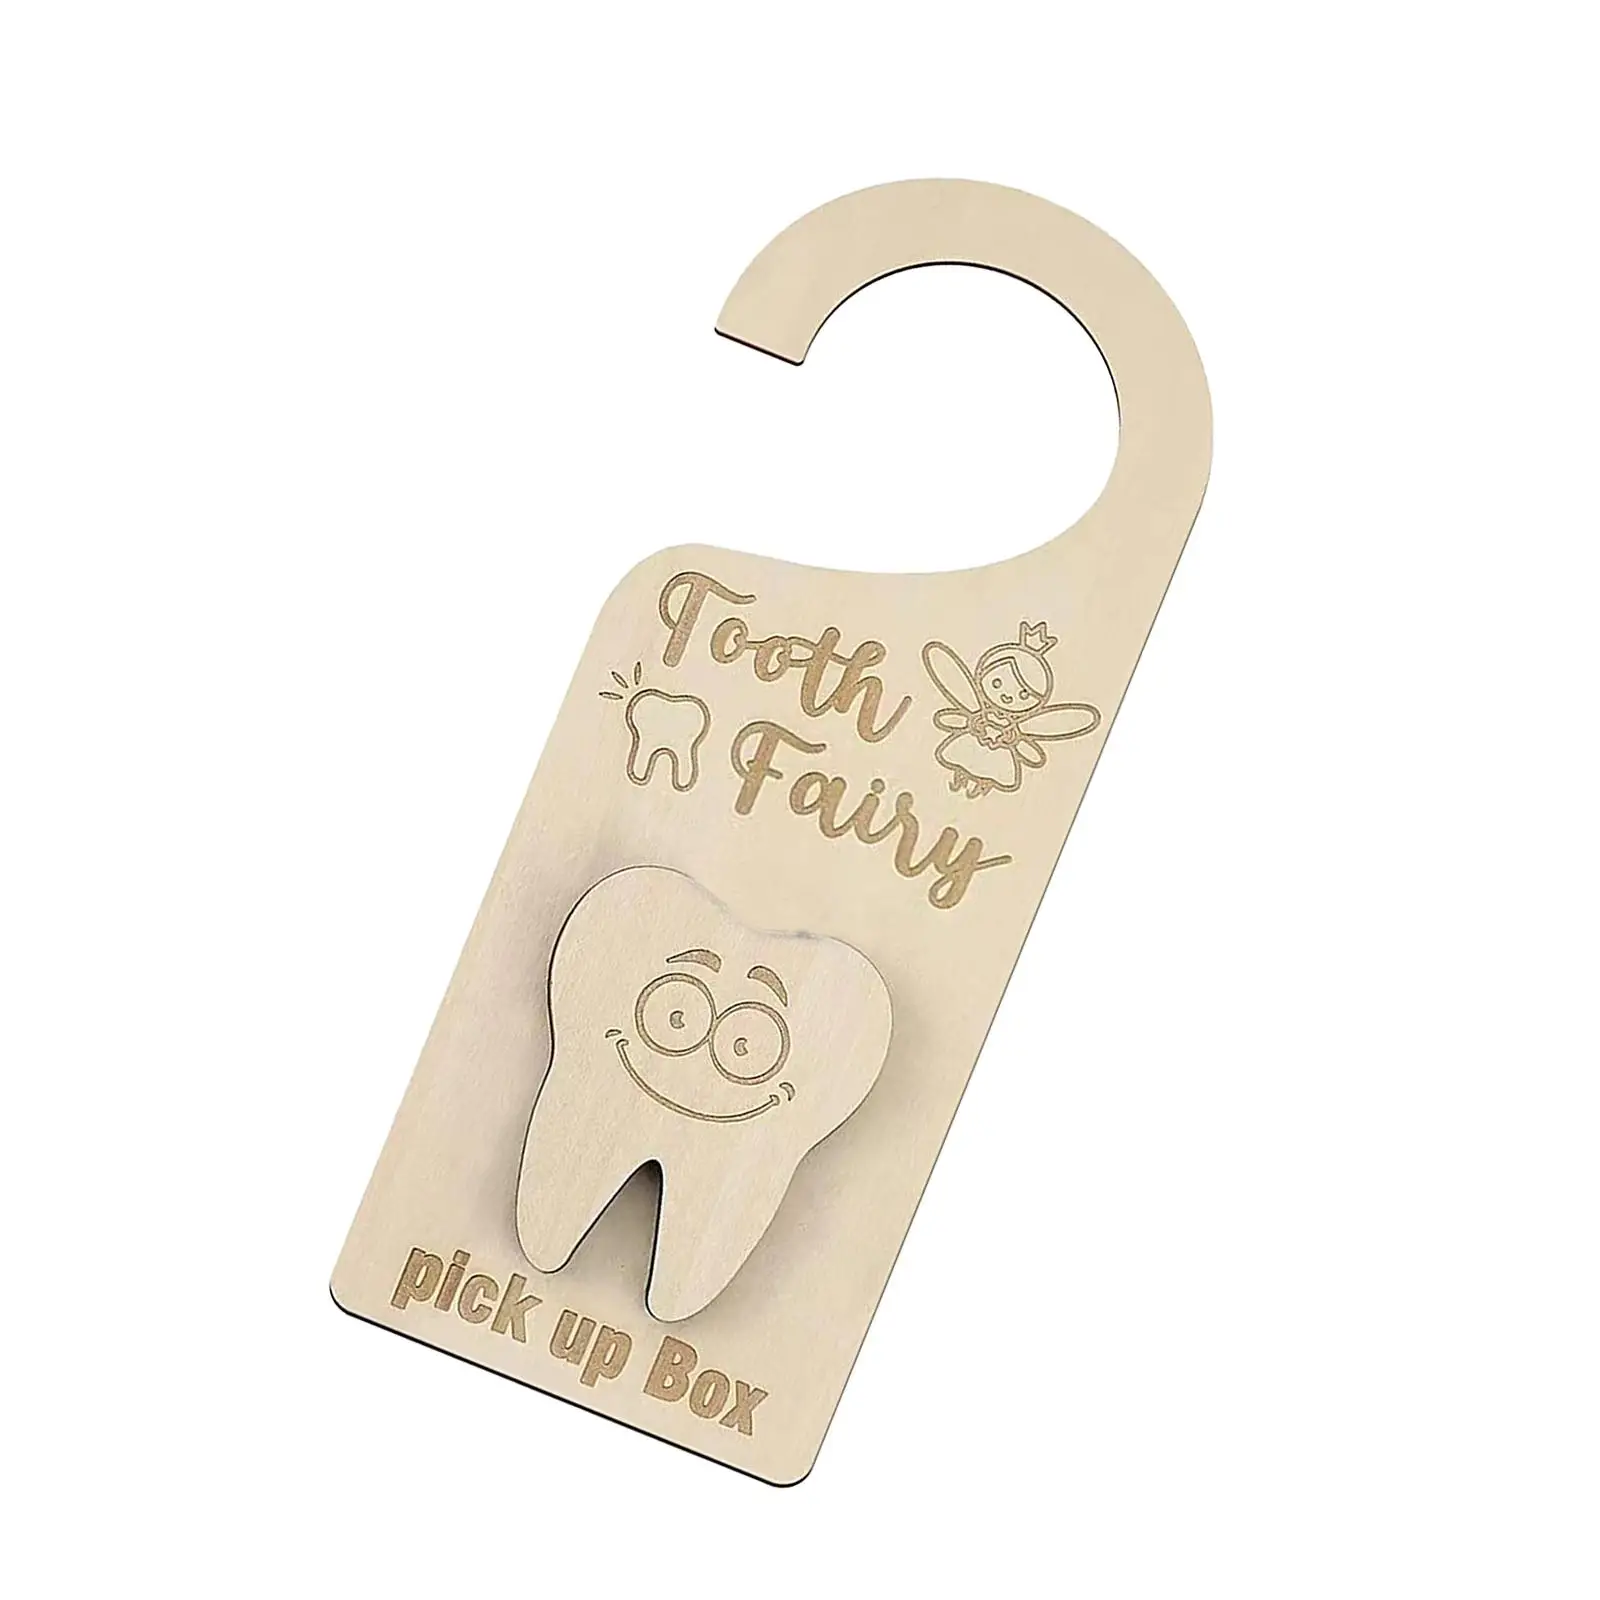 Wooden Tooth Fairy Pick up Box Room Decor for Lost Teeth Kids Children Girls